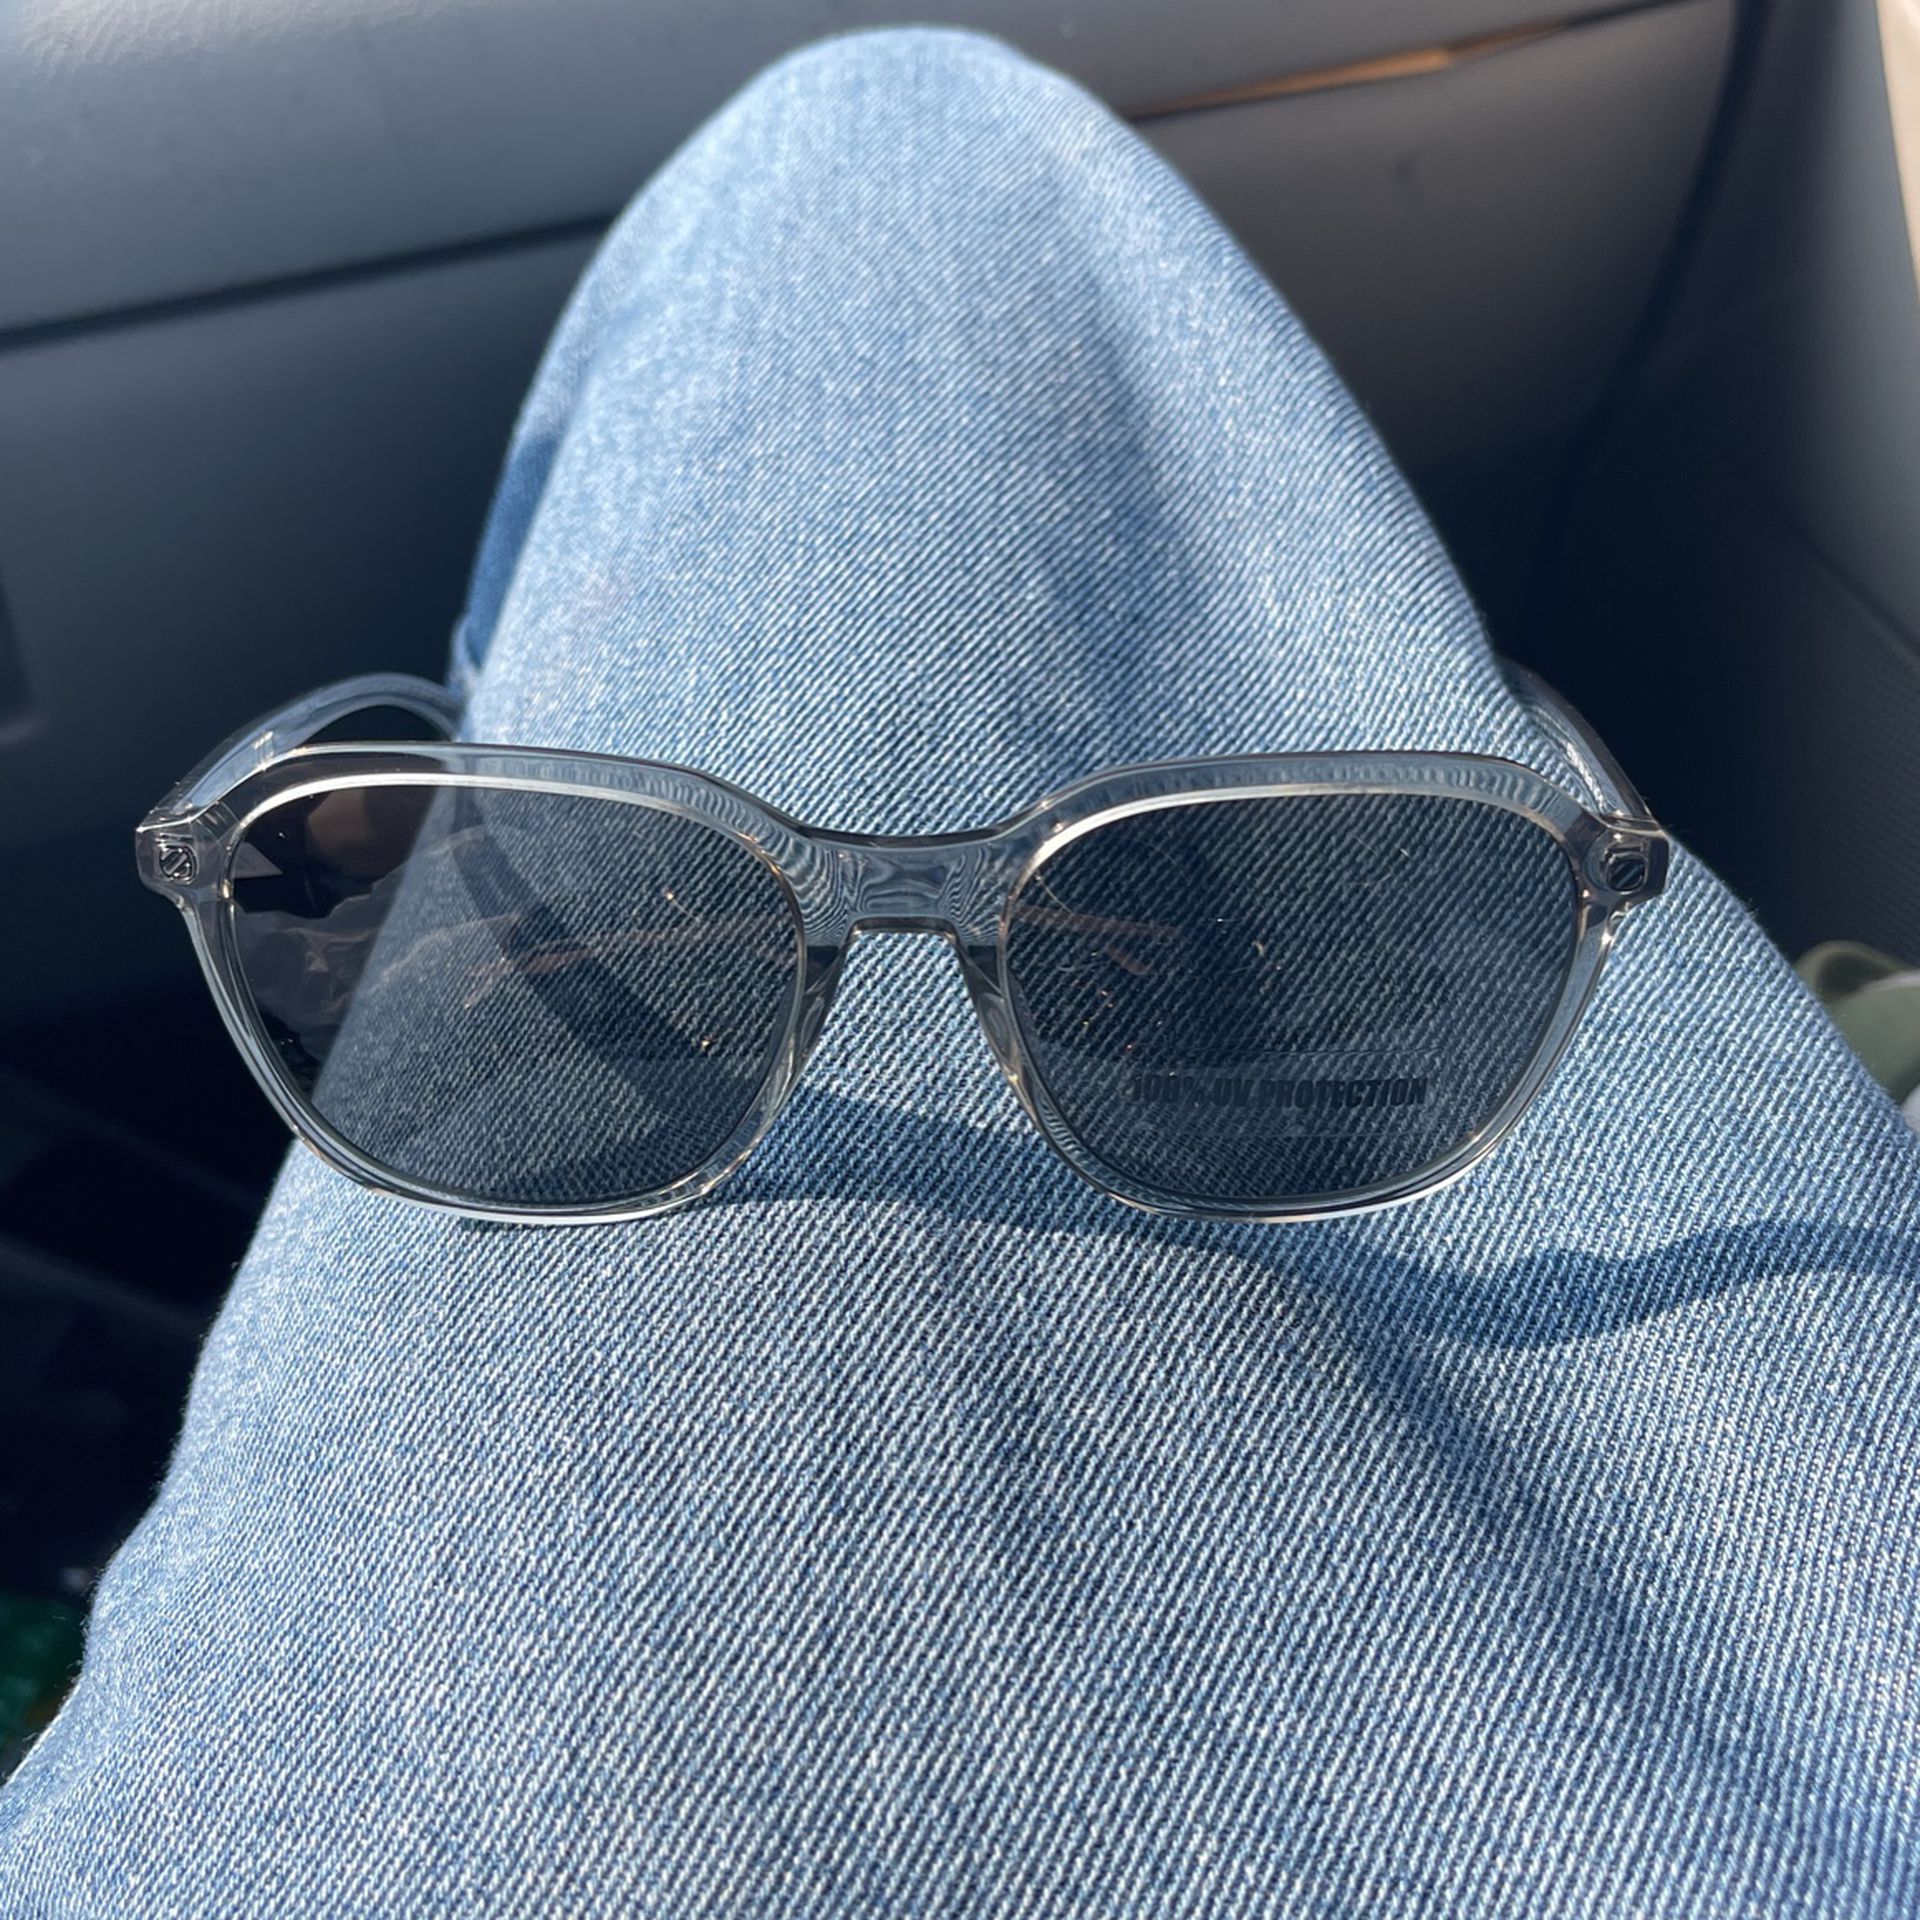 Louis Vuitton Sunglasses for Sale in Frisco, TX - OfferUp